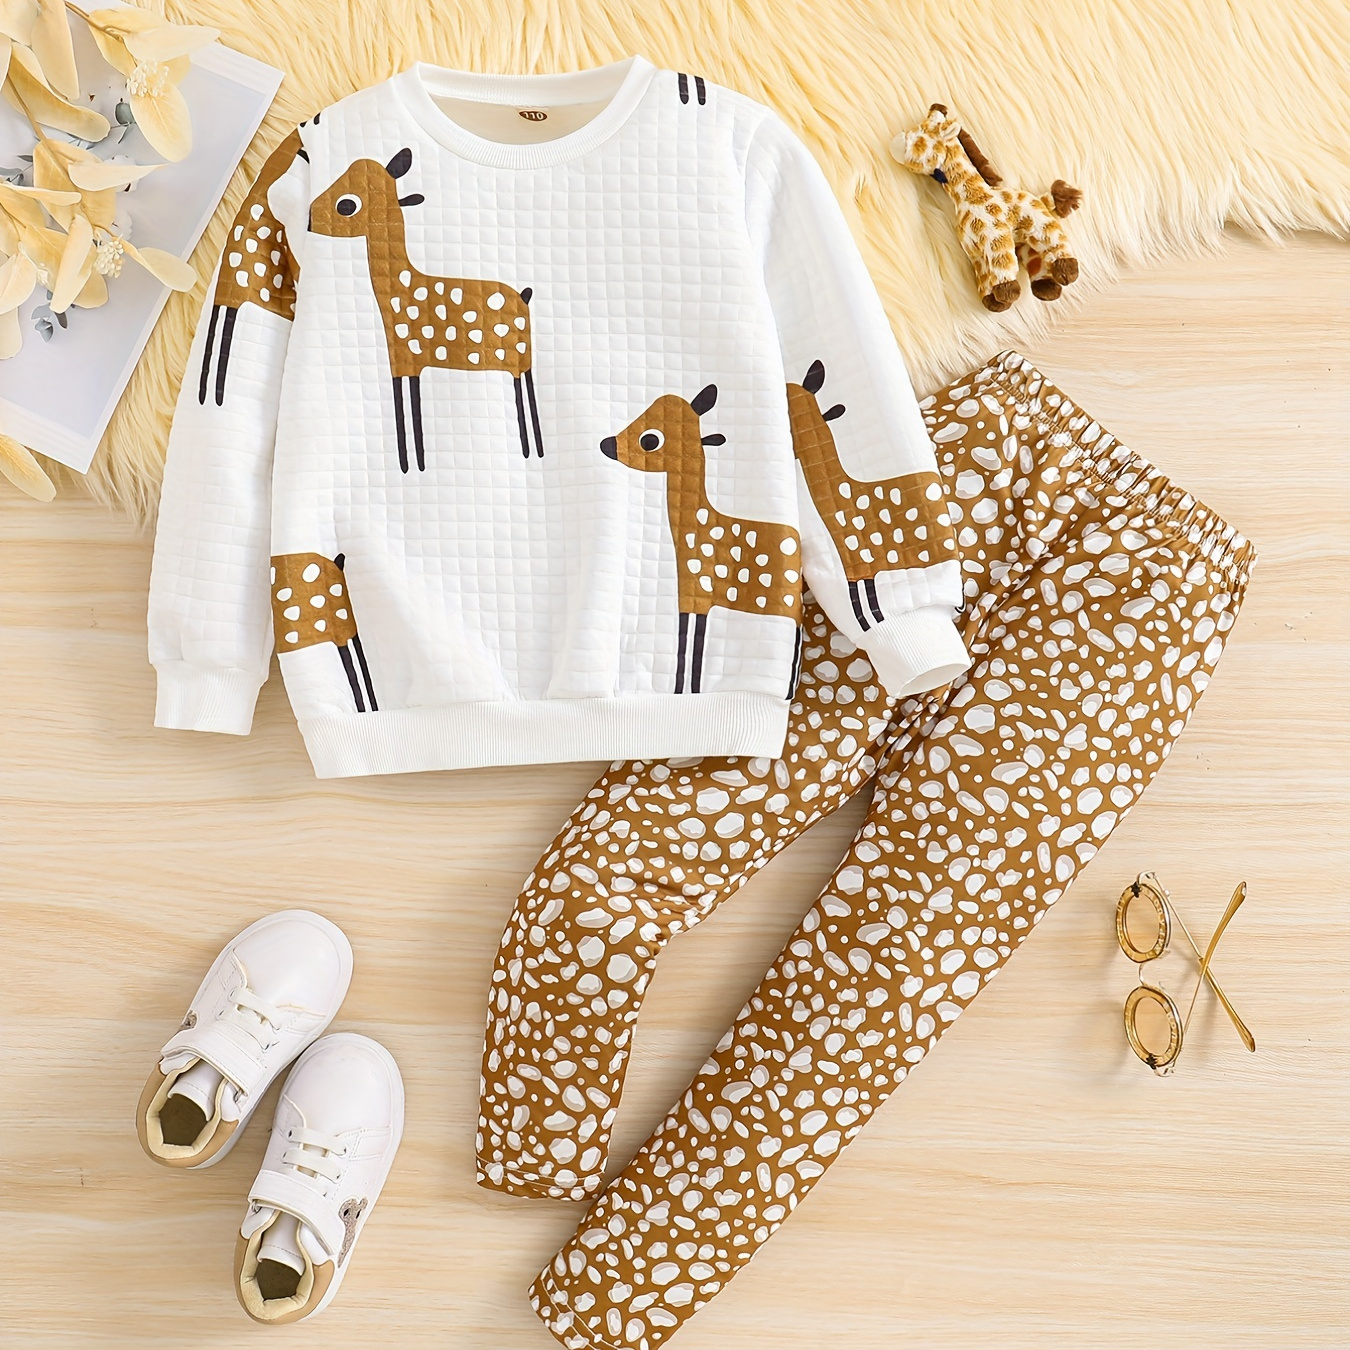 

Toddler Girl's Cartoon Deer Pattern 2pcs, Waffle Texture Sweatshirt & Leggings Set, Casual Outfits, Kids Clothes For Spring Fall